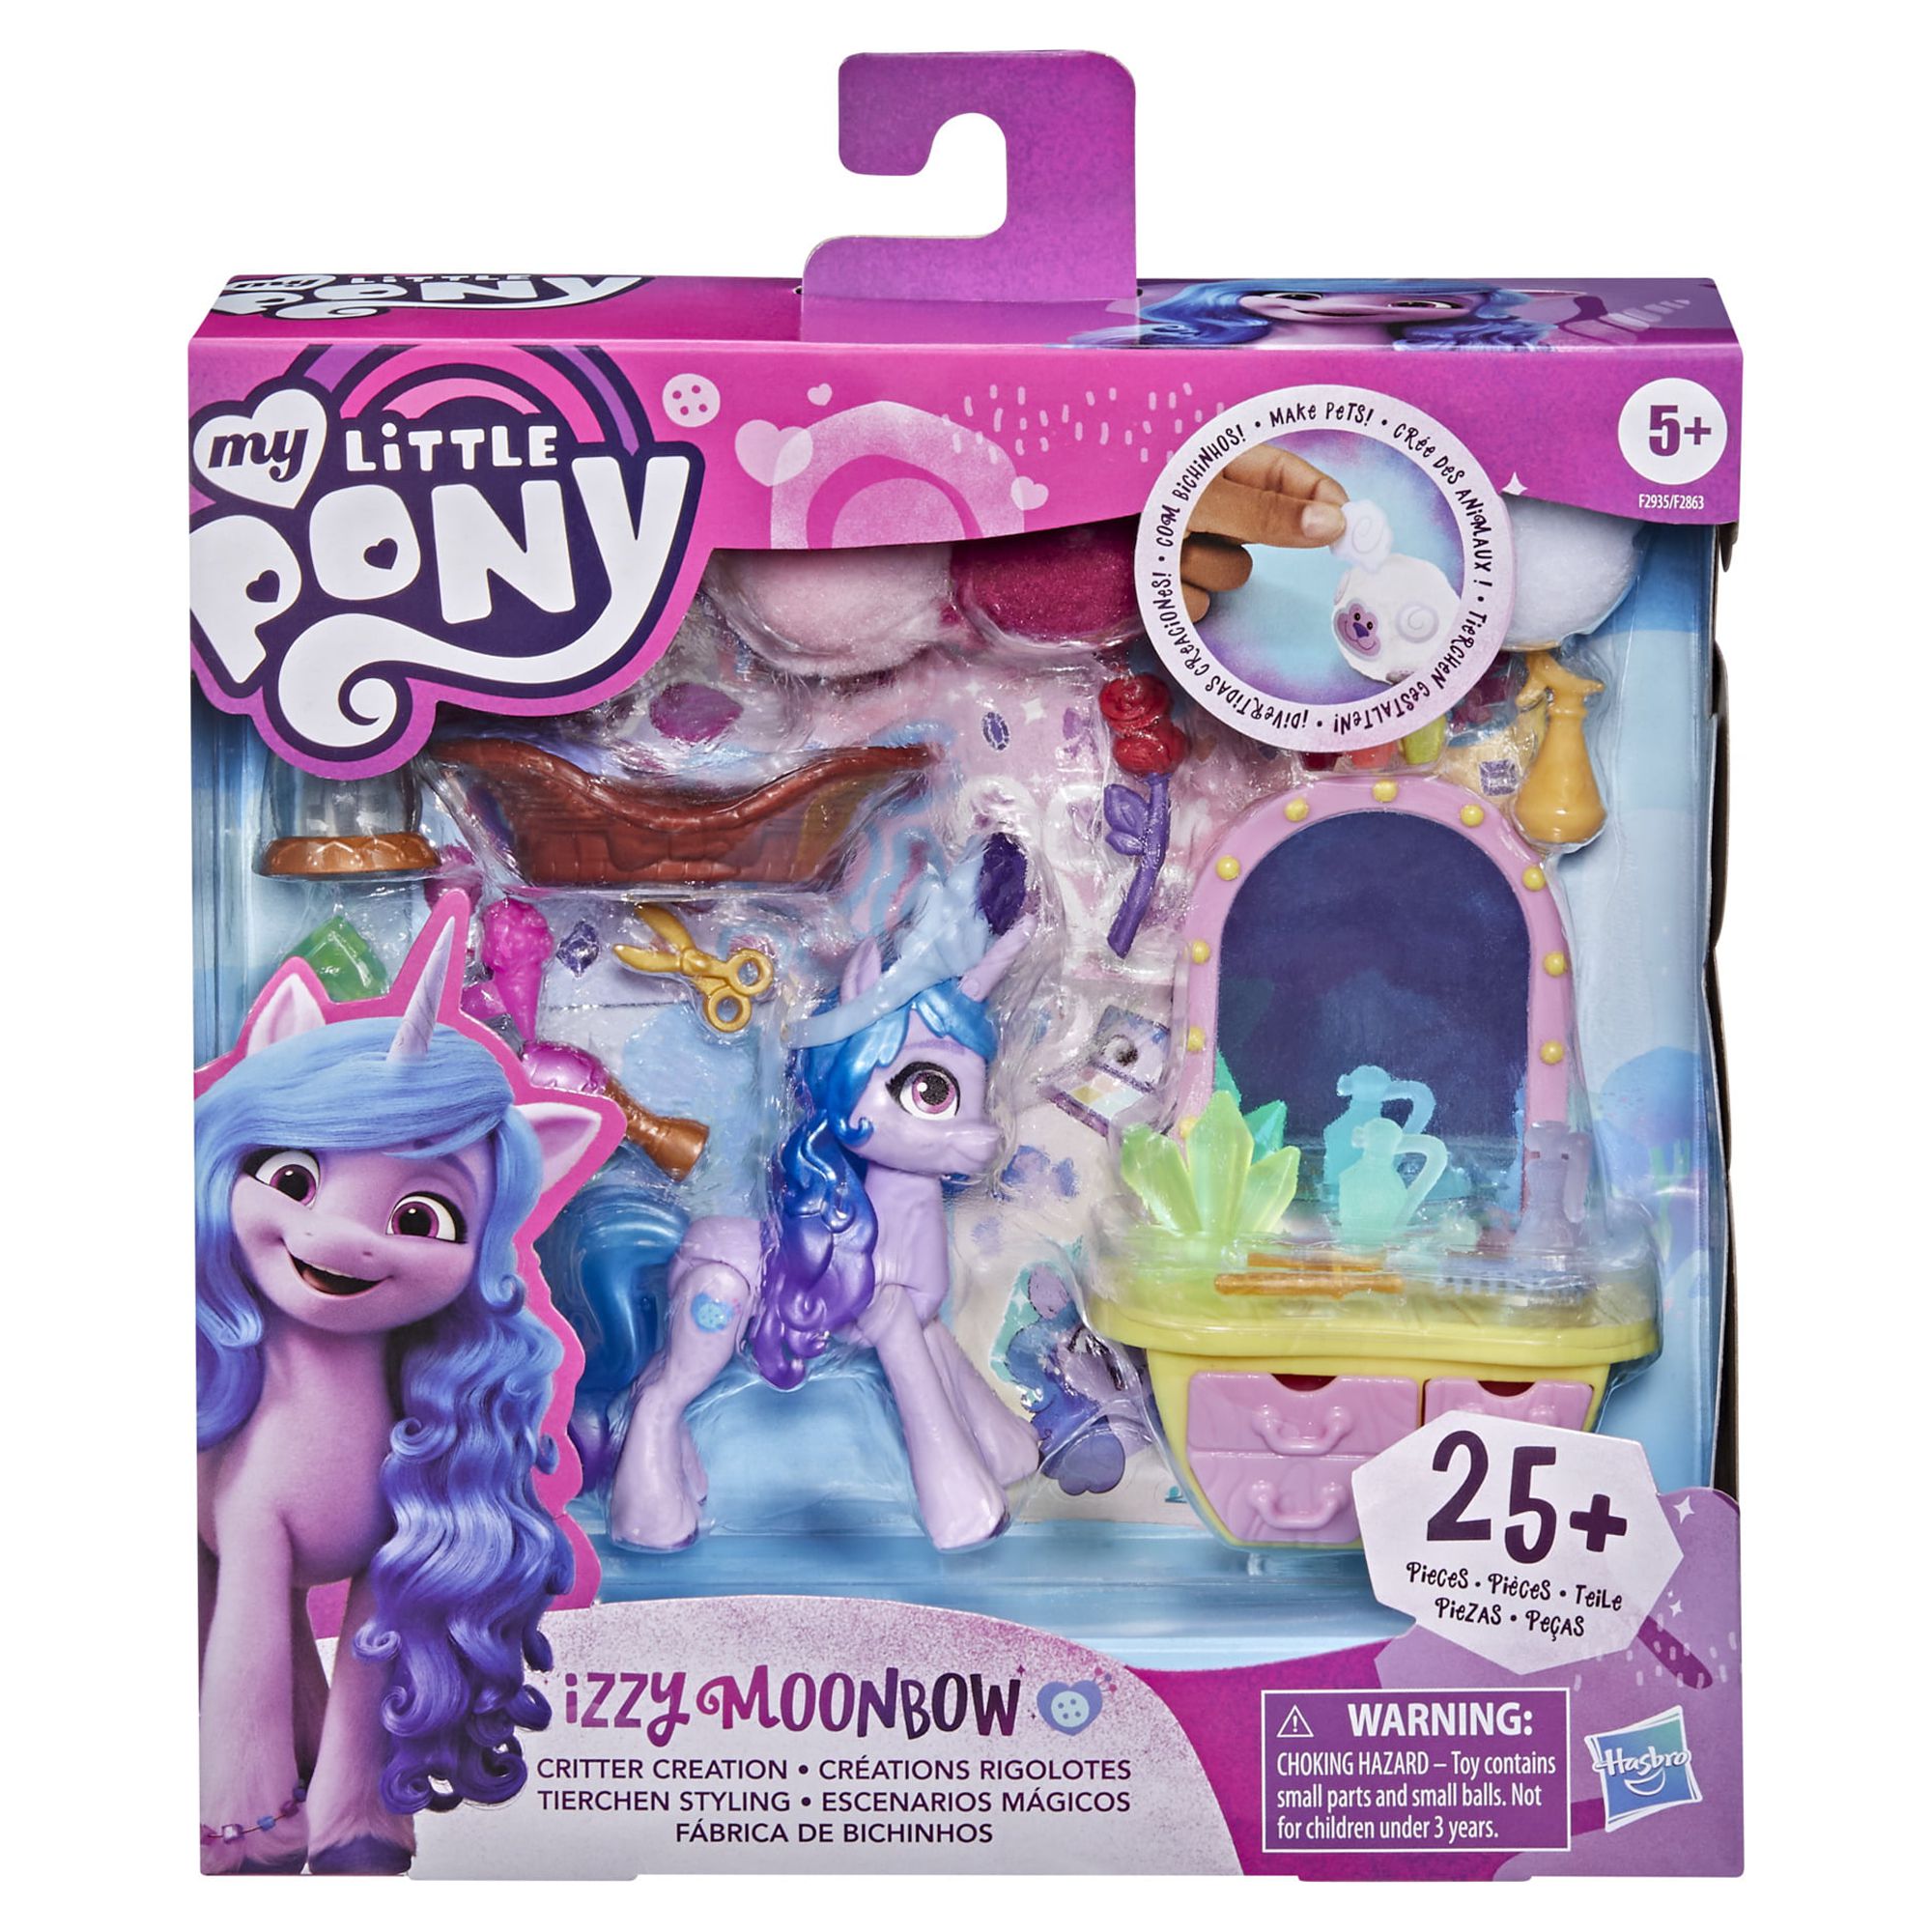 My Little Pony: A New Generation Movie&nbsp;Story Scenes Critter Creation Izzy Moonbow Playset - image 2 of 10